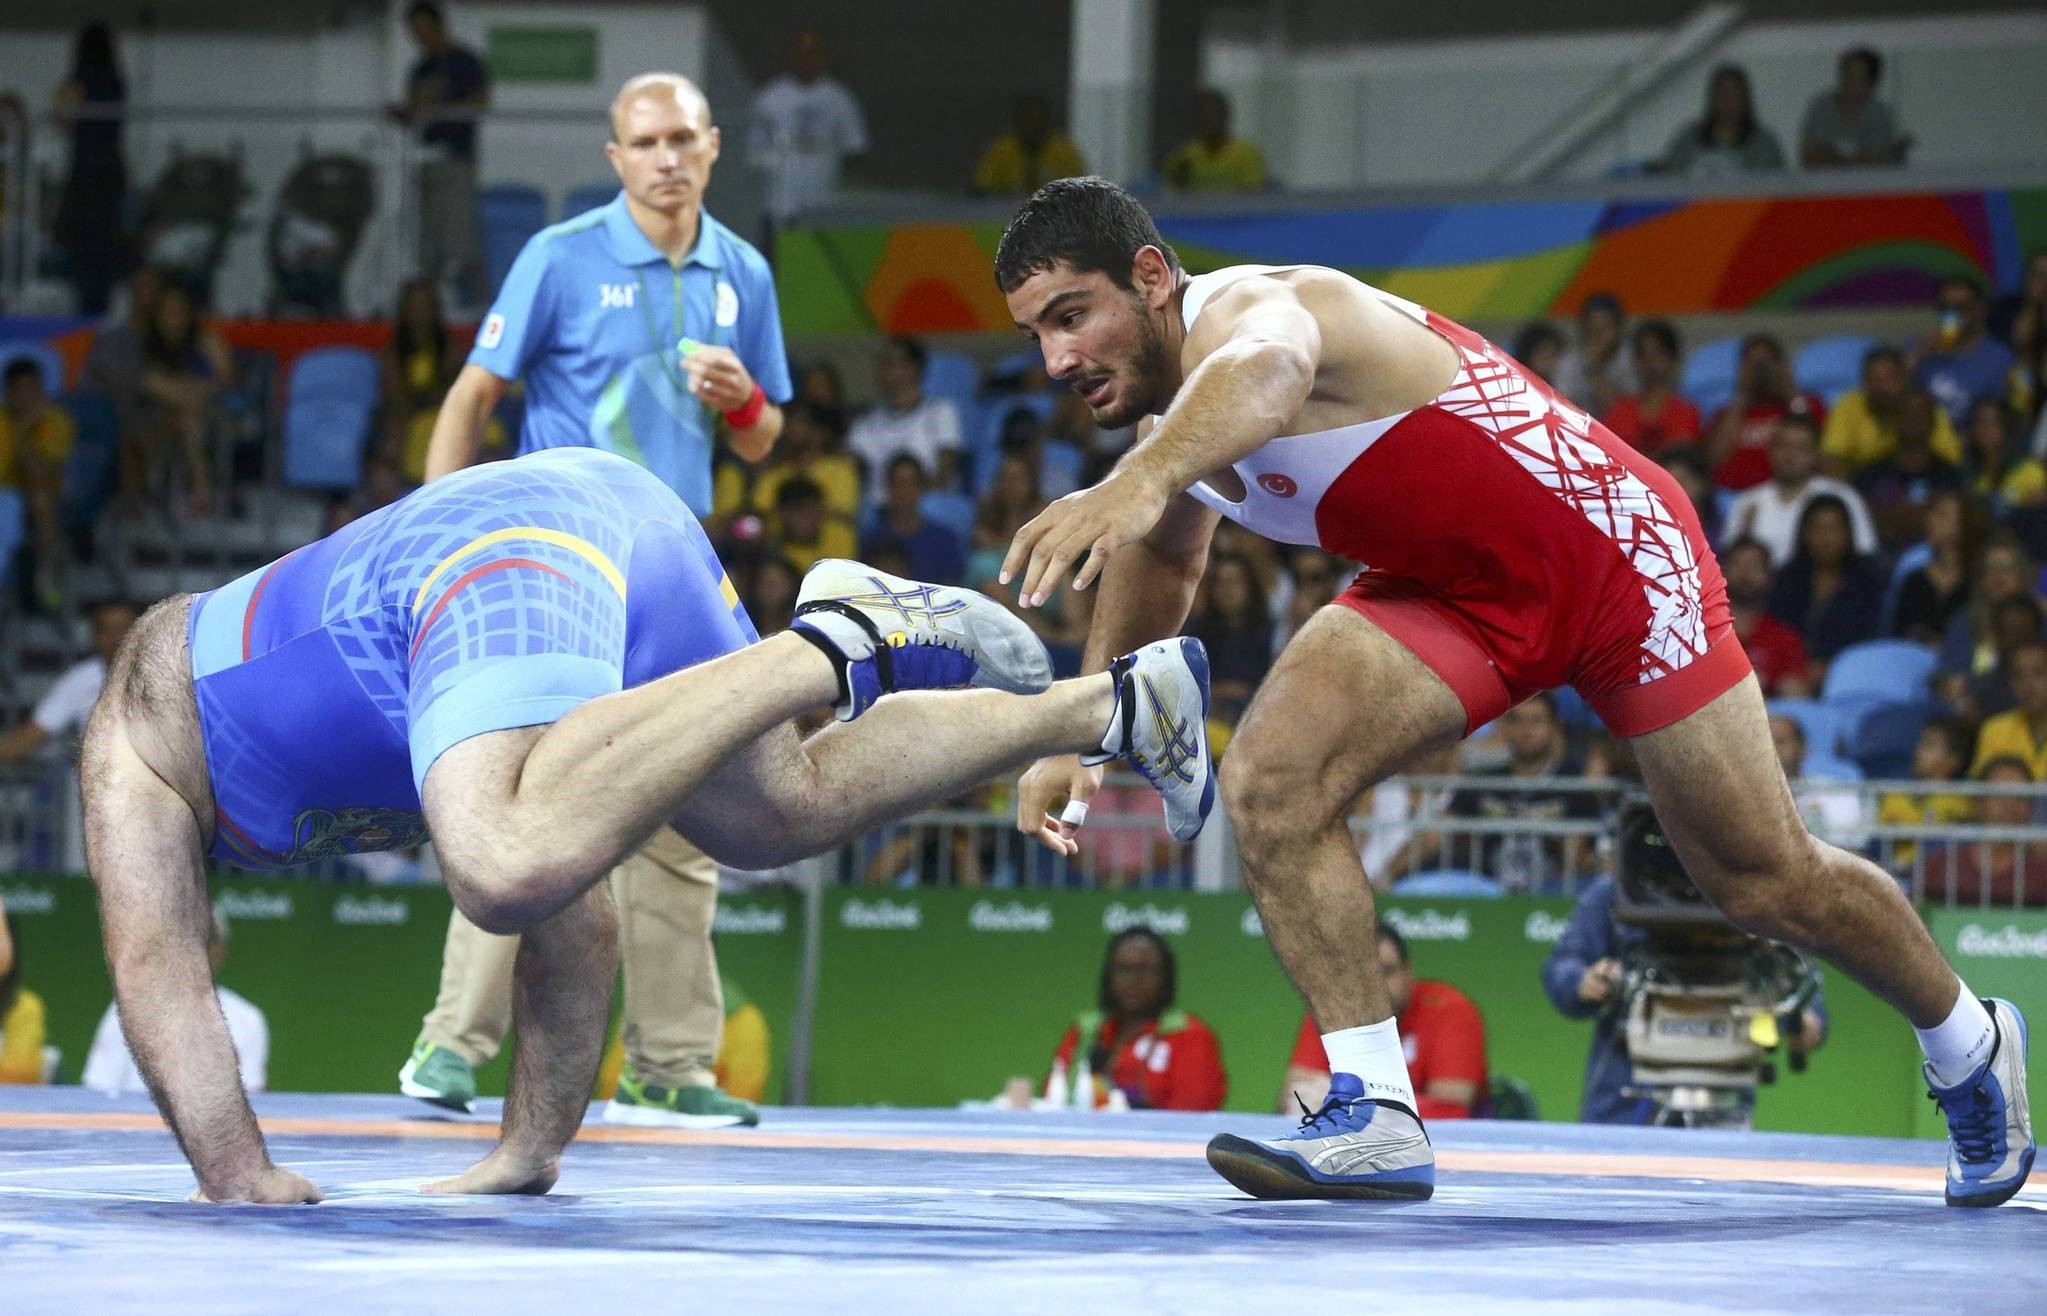 Taha Akgul (red) of Turkey in action against Levan Berianidze (blue) of Armenia during the men's Freestyle 125kg semi final bout of the Rio 2016 Olympic Games Wrestling events. (EPA Photo)